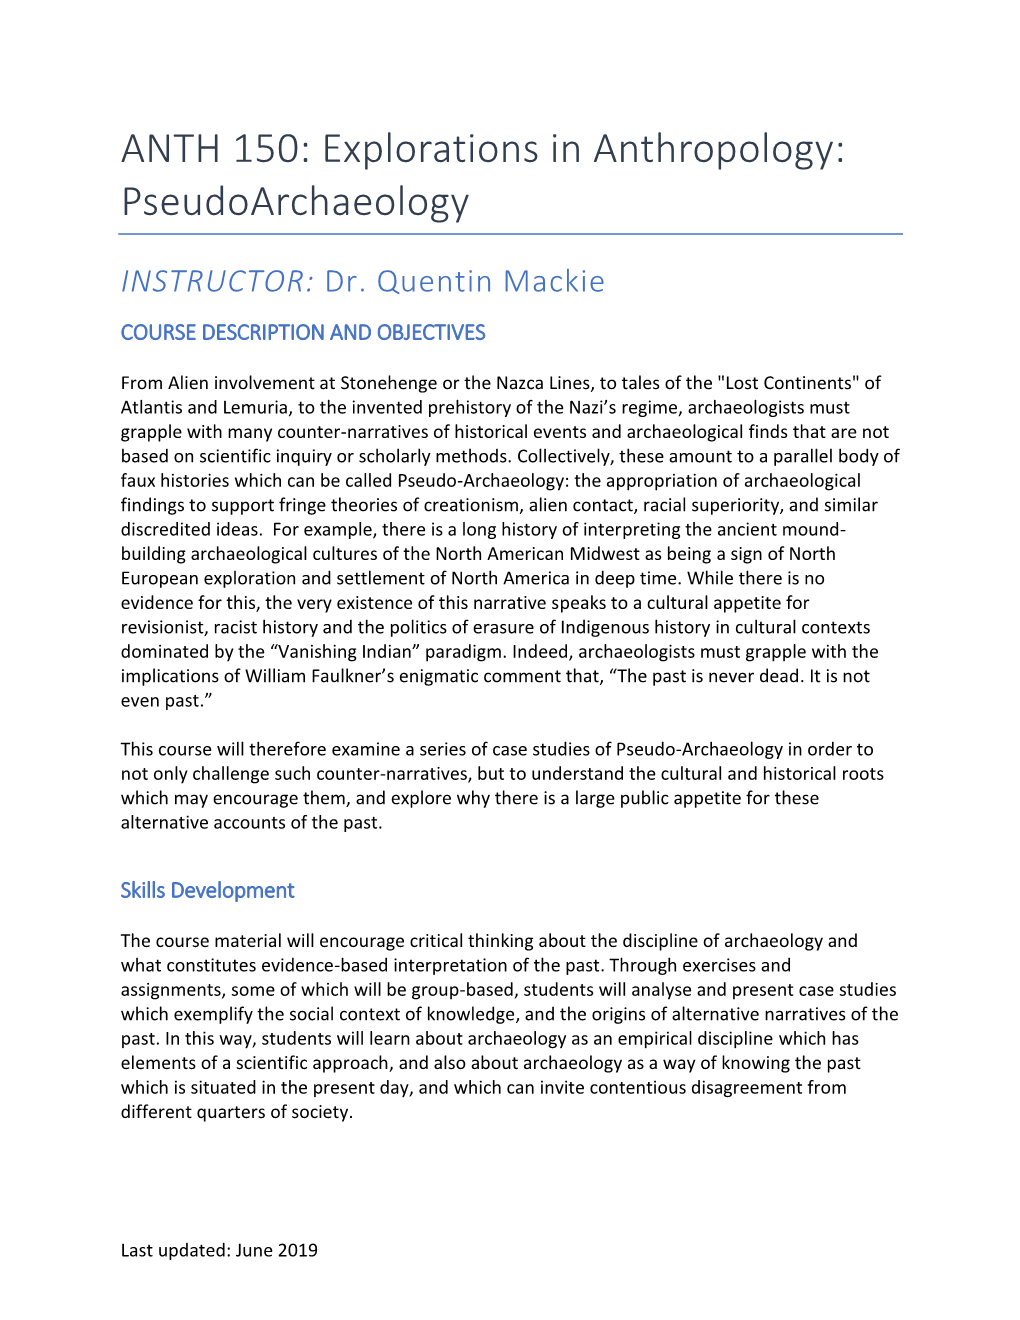 ANTH 150: Explorations in Anthropology: Pseudoarchaeology